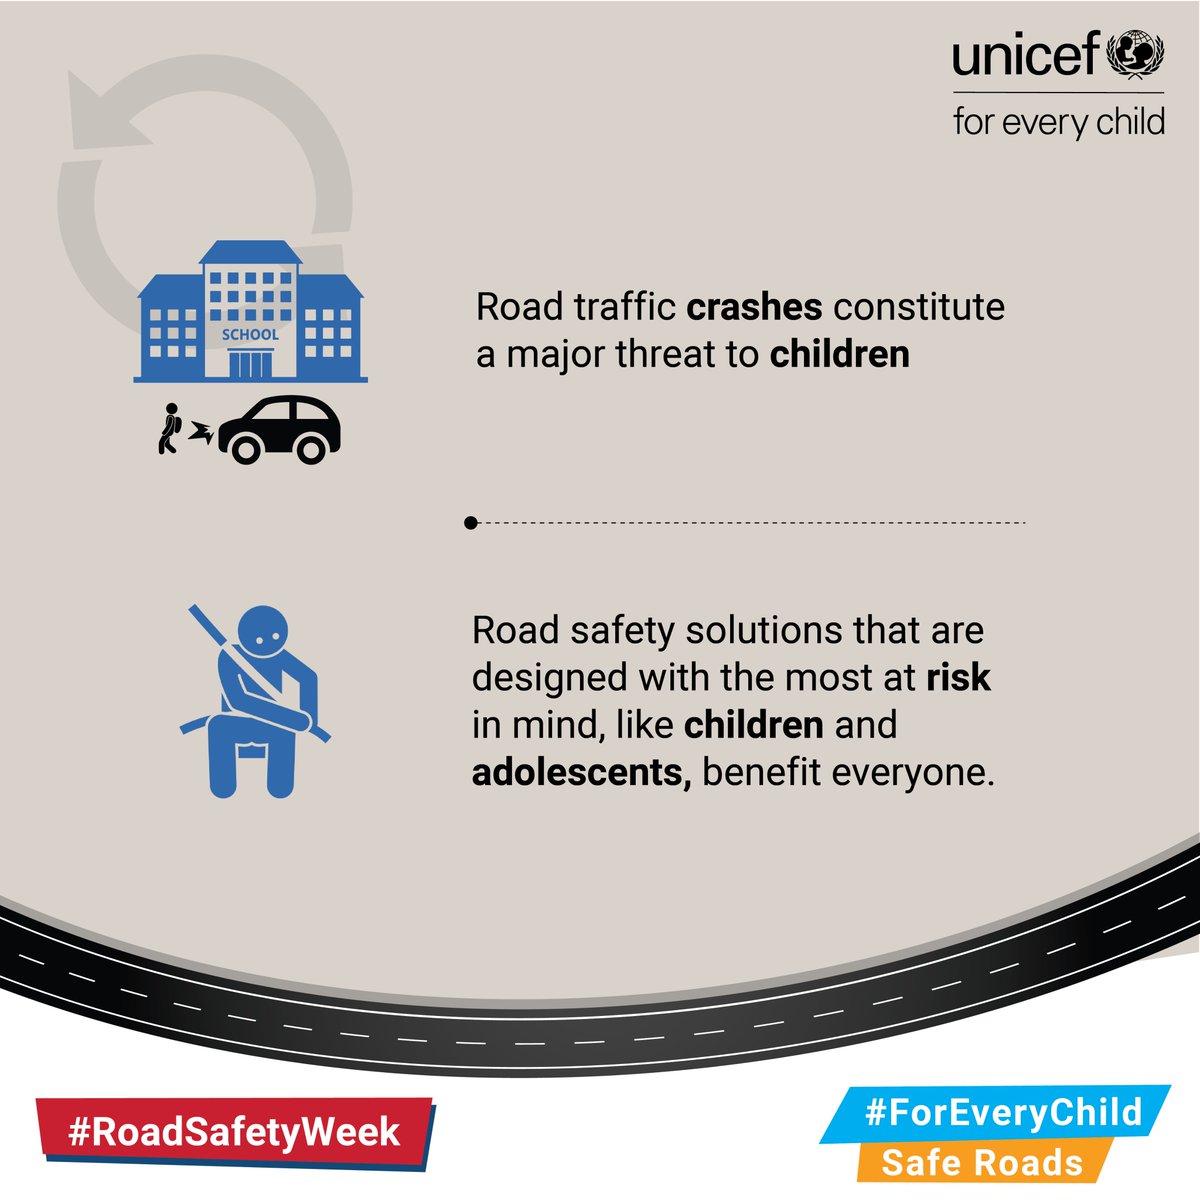 There is an urgent need for all of us to rethink mobility and make roads safer #ForEveryChild.

#RoadSafetyWeek